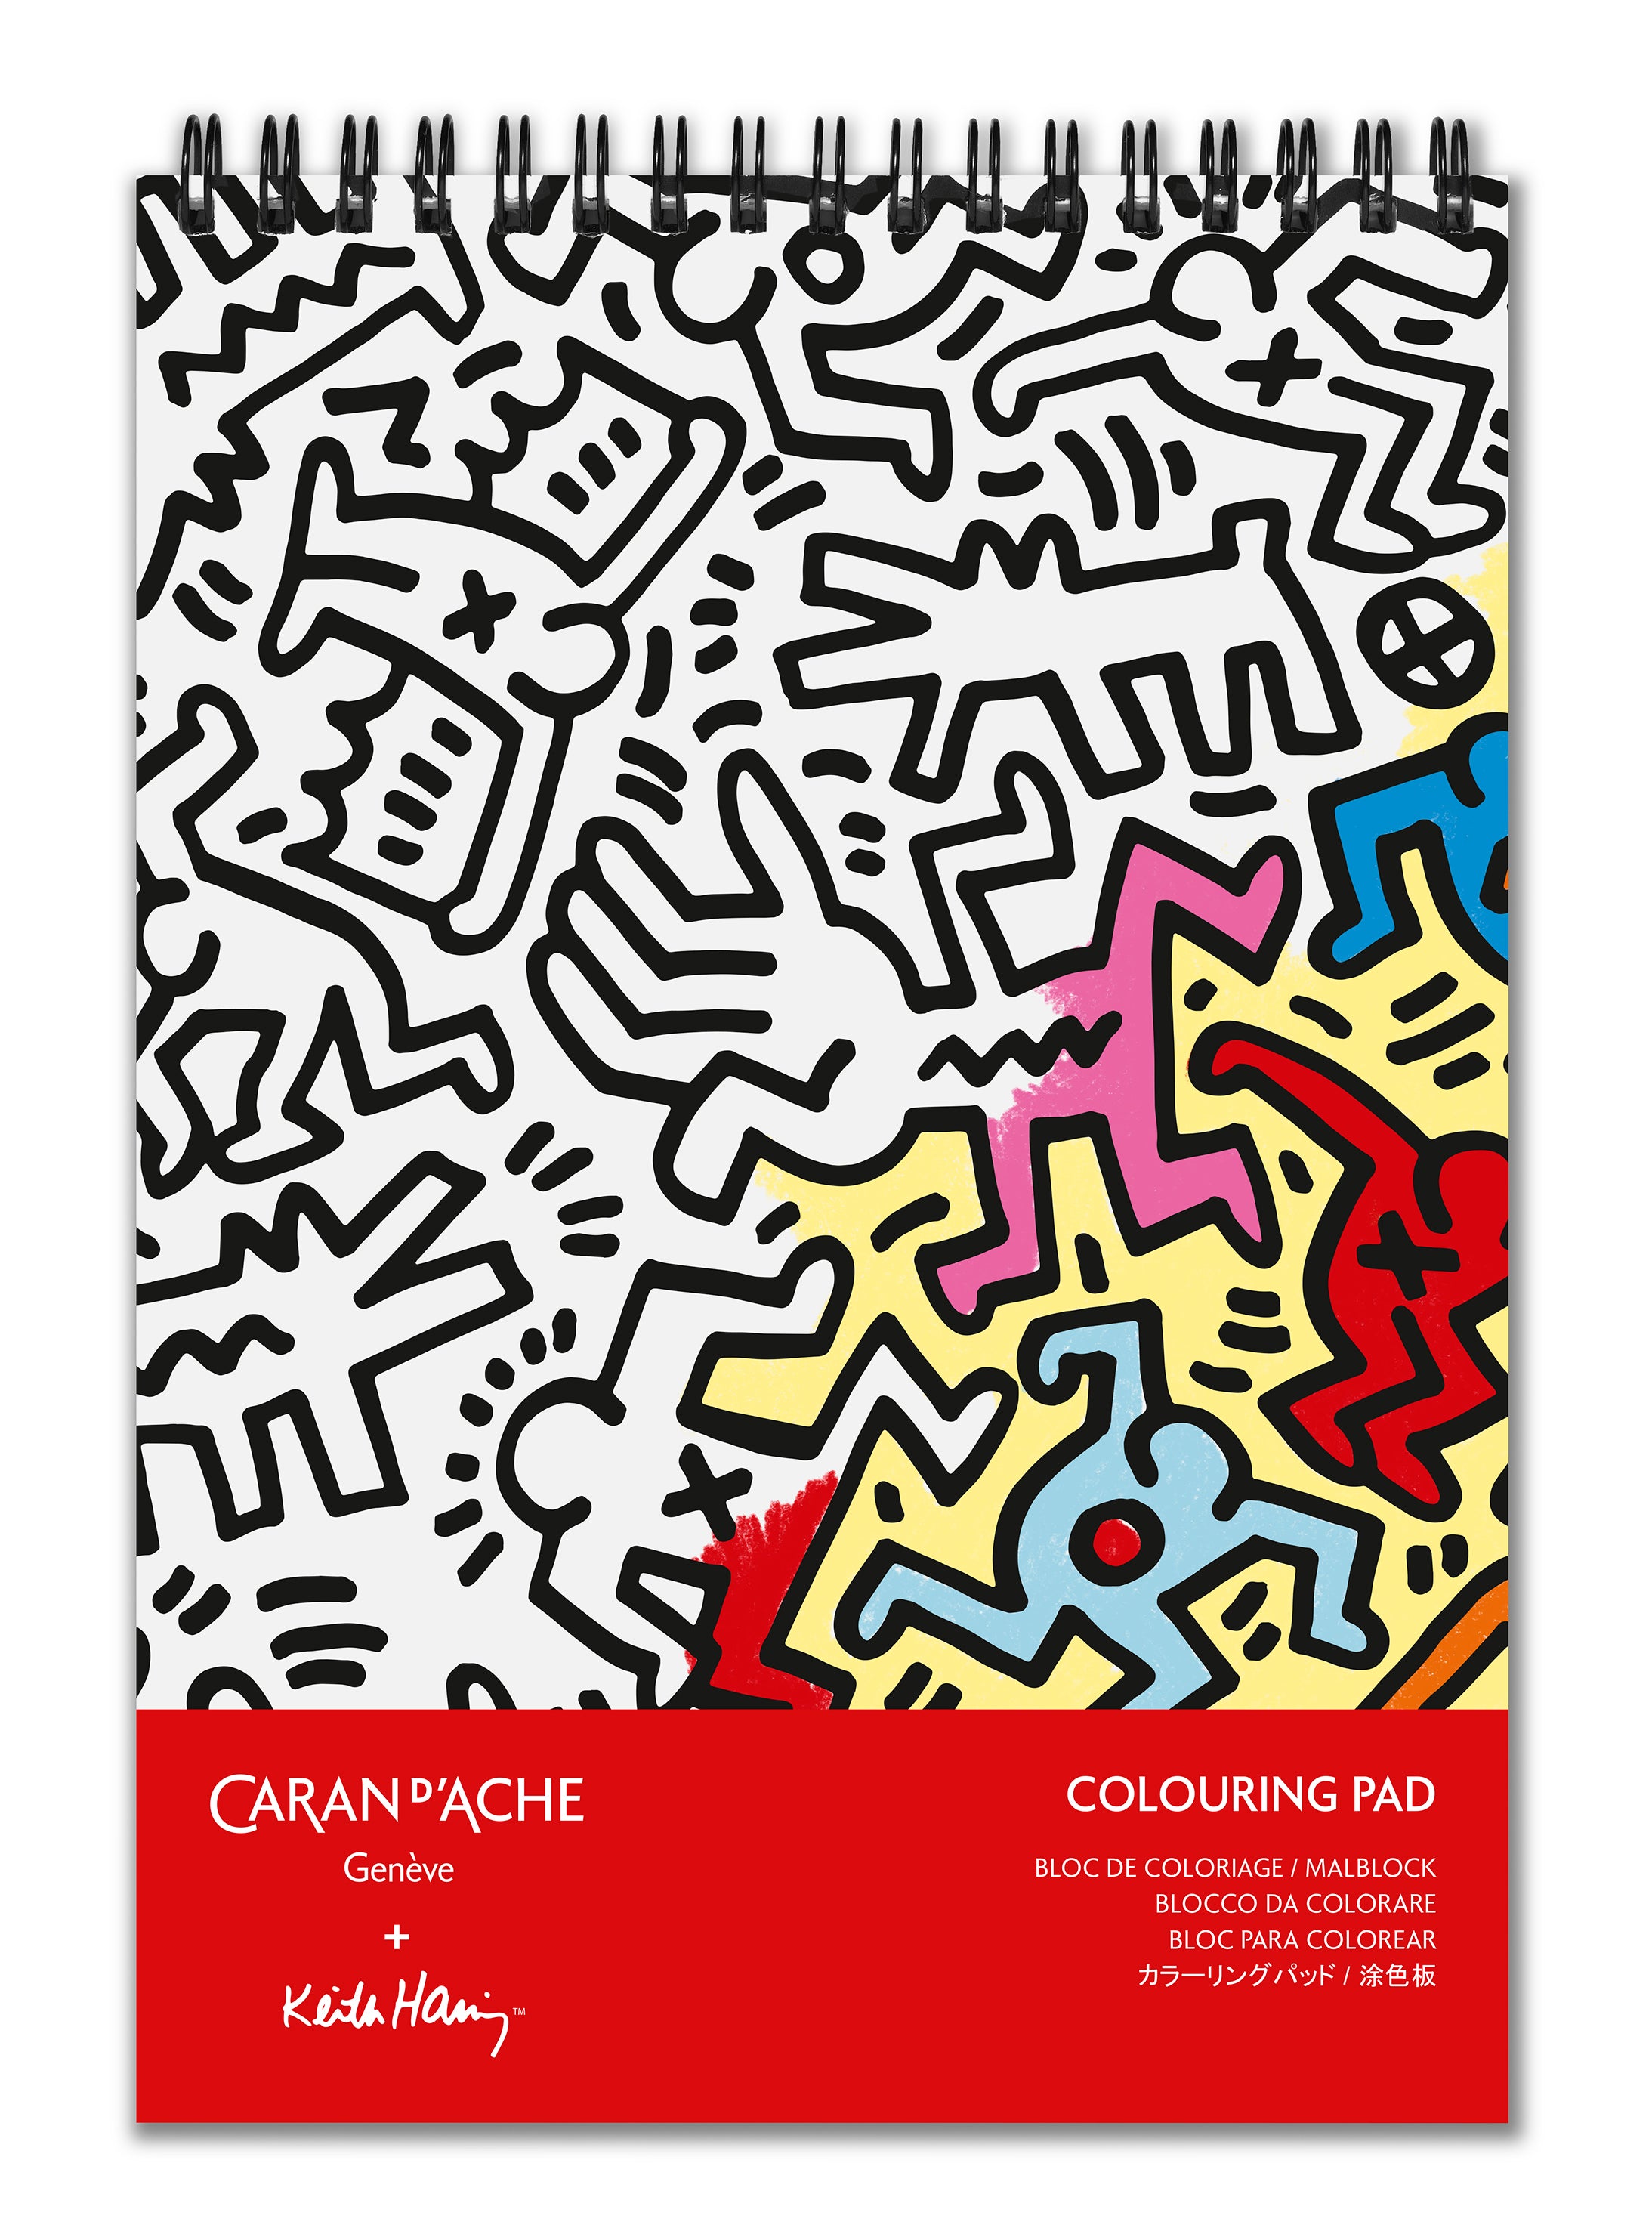 Keith haring with caran d'ache special edition colouring book